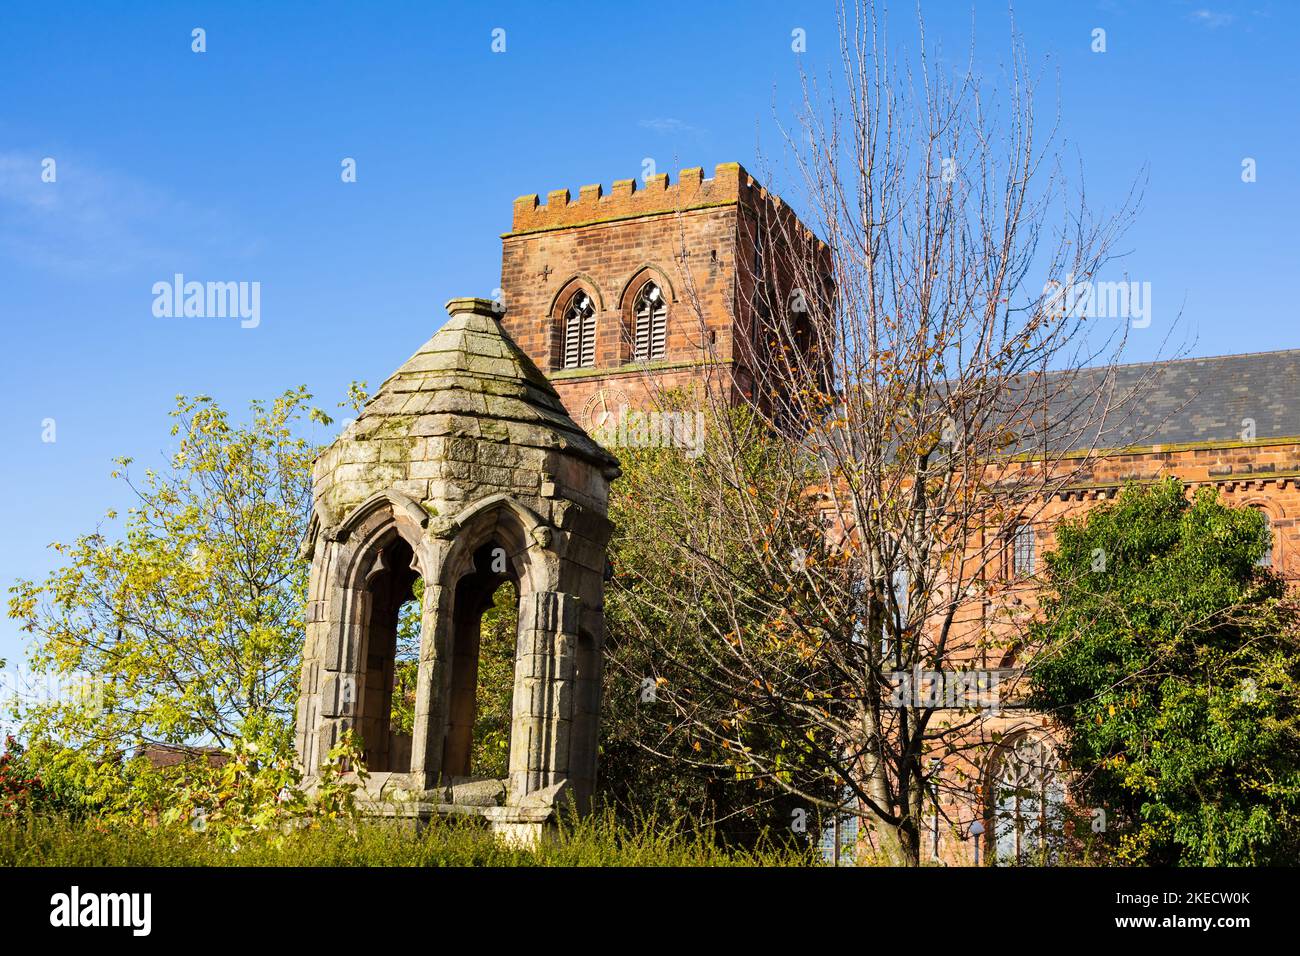 The original 1300 carved pulpit in front of The Abbey church of St Peter and St Paul,  Shrewsbury, Shropshire, England. Stock Photo